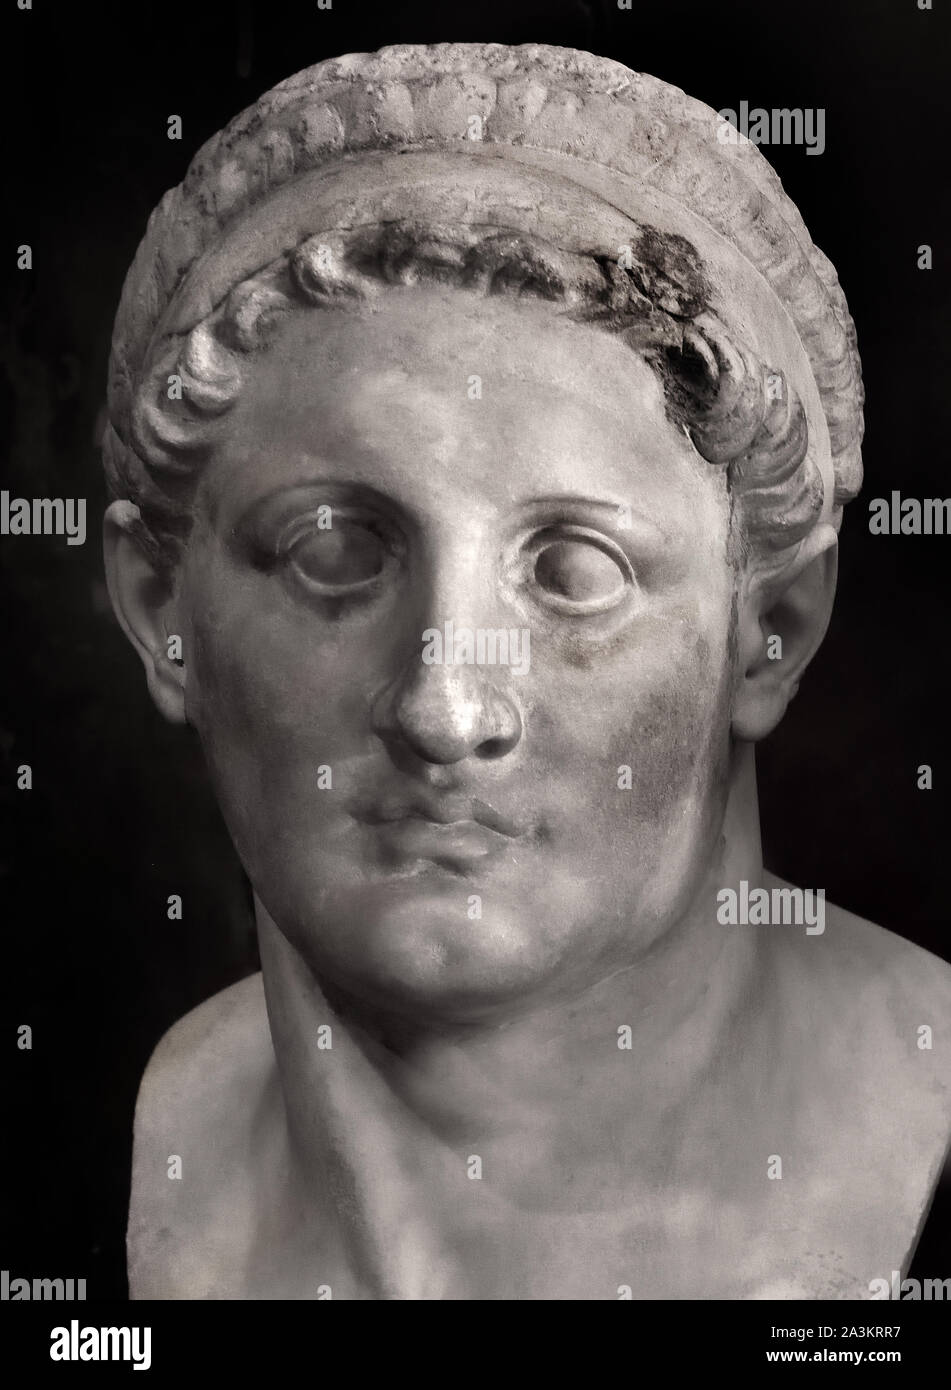 Ptolemy I Soter – The Hellenistic Age Podcast